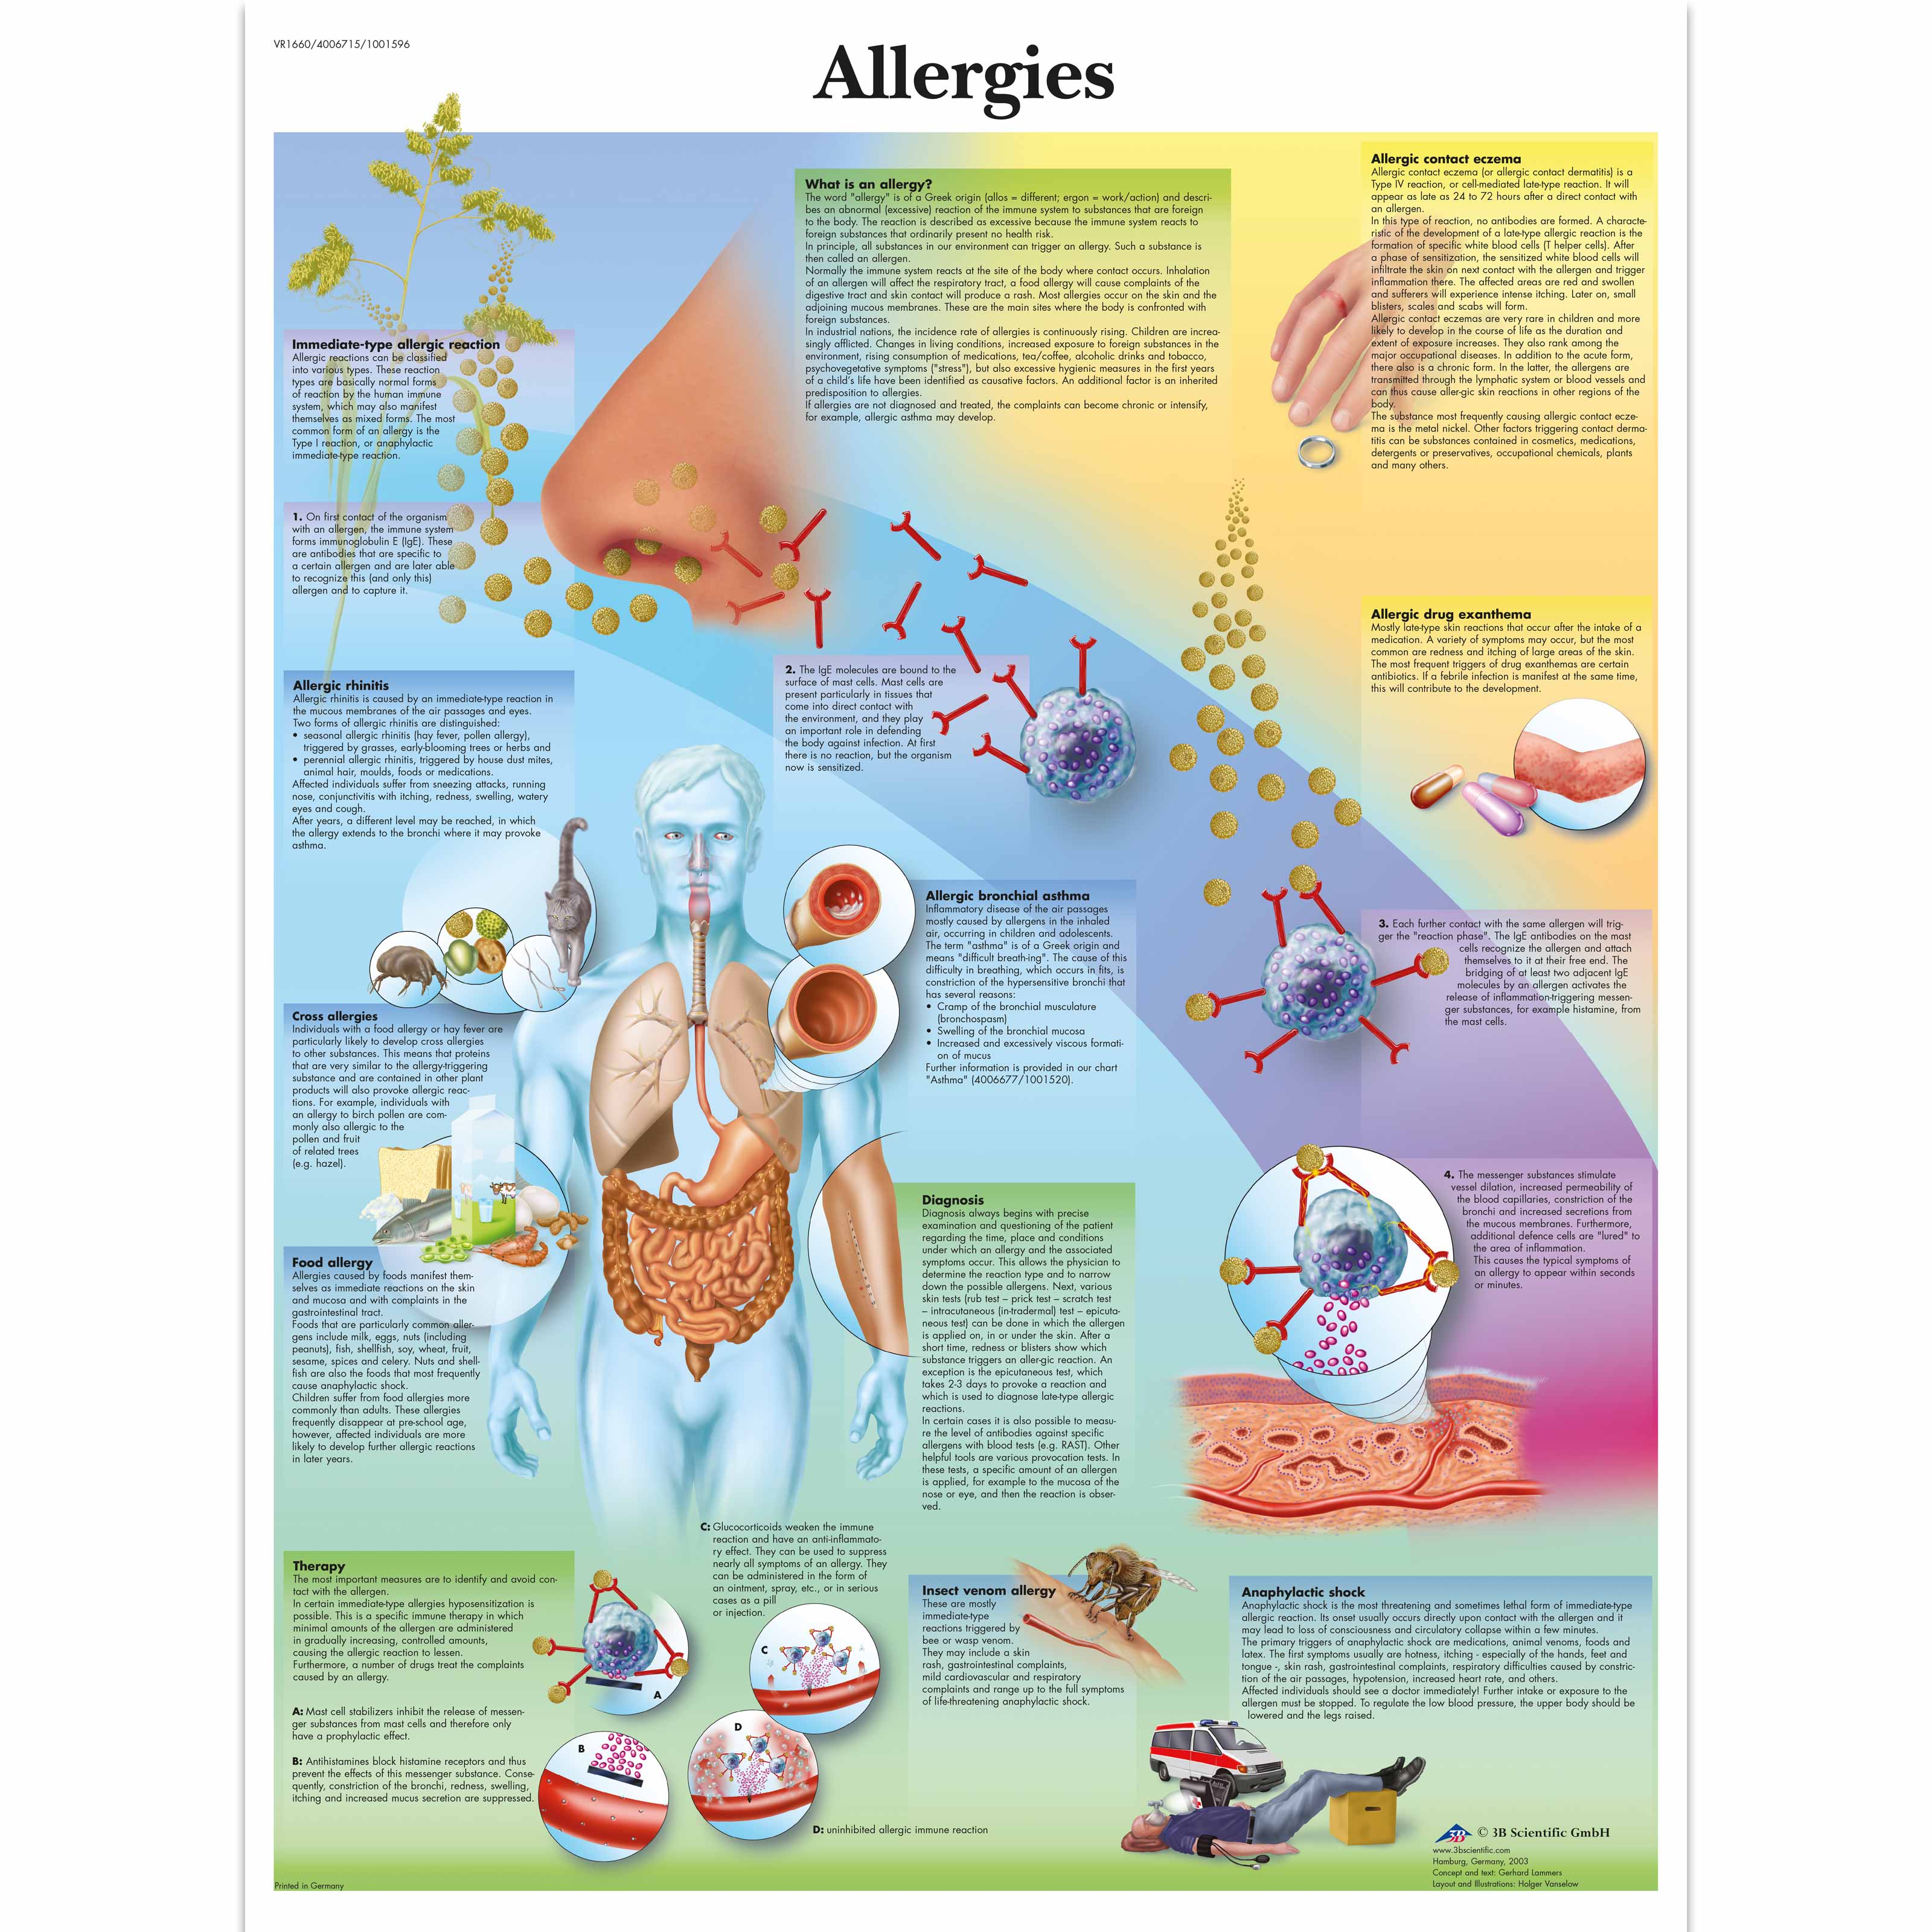 Asthma Drug Therapy Chart